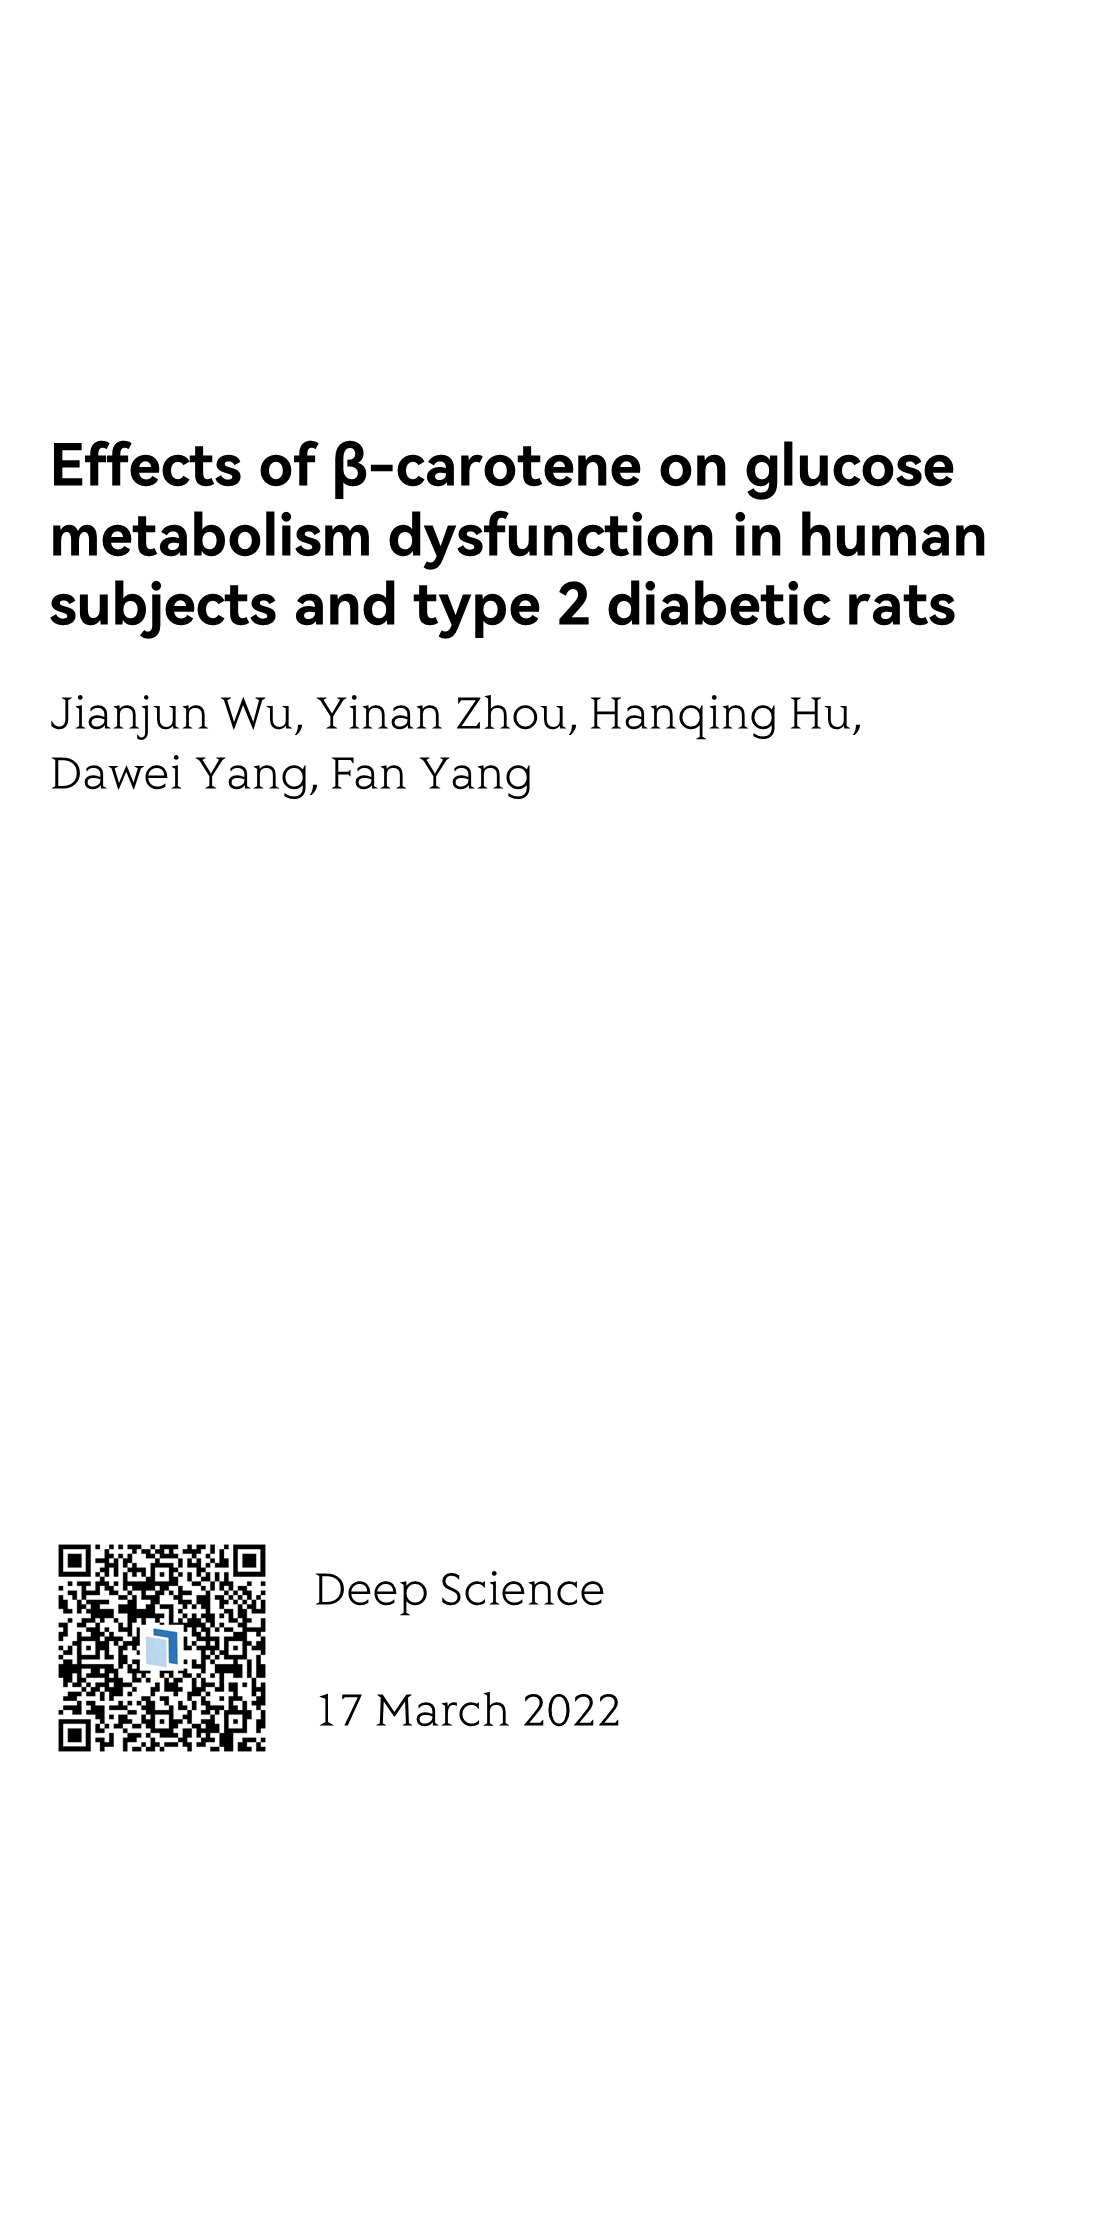 Effects of β-carotene on glucose metabolism dysfunction in human subjects and type 2 diabetic rats_1